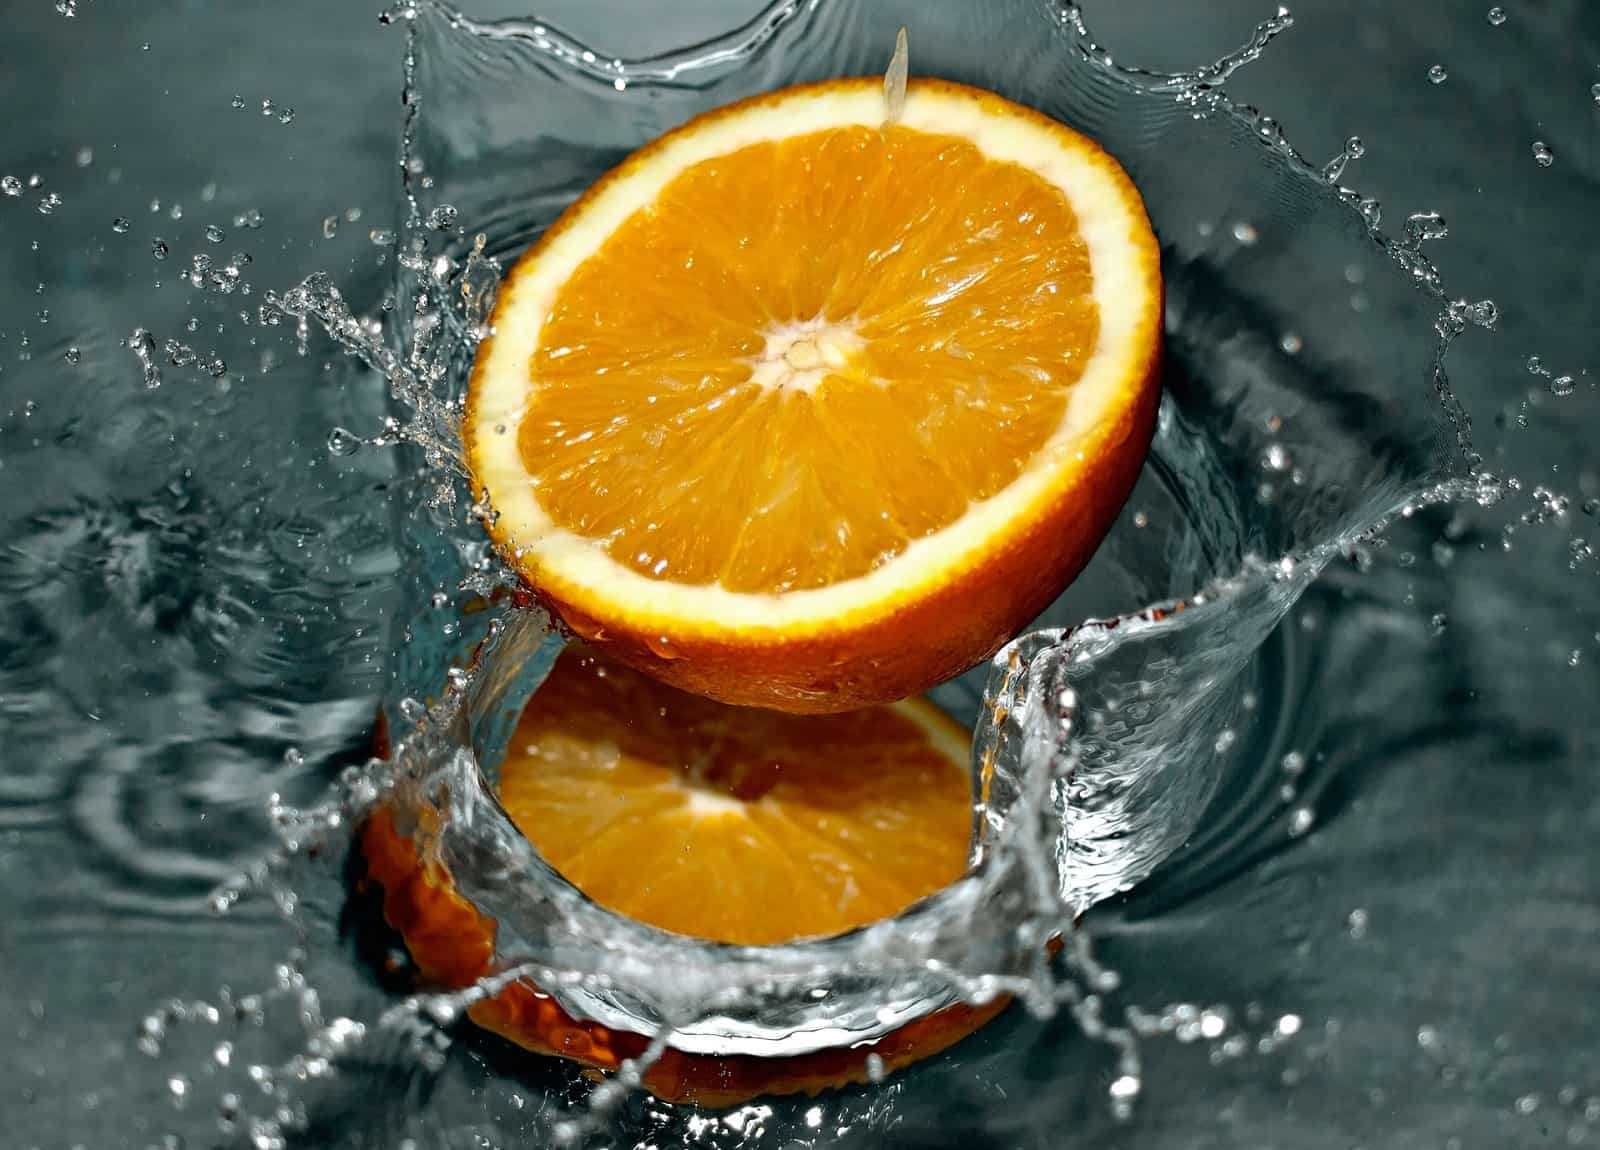 Orange will help you lose weight – it’s scientifically proven!